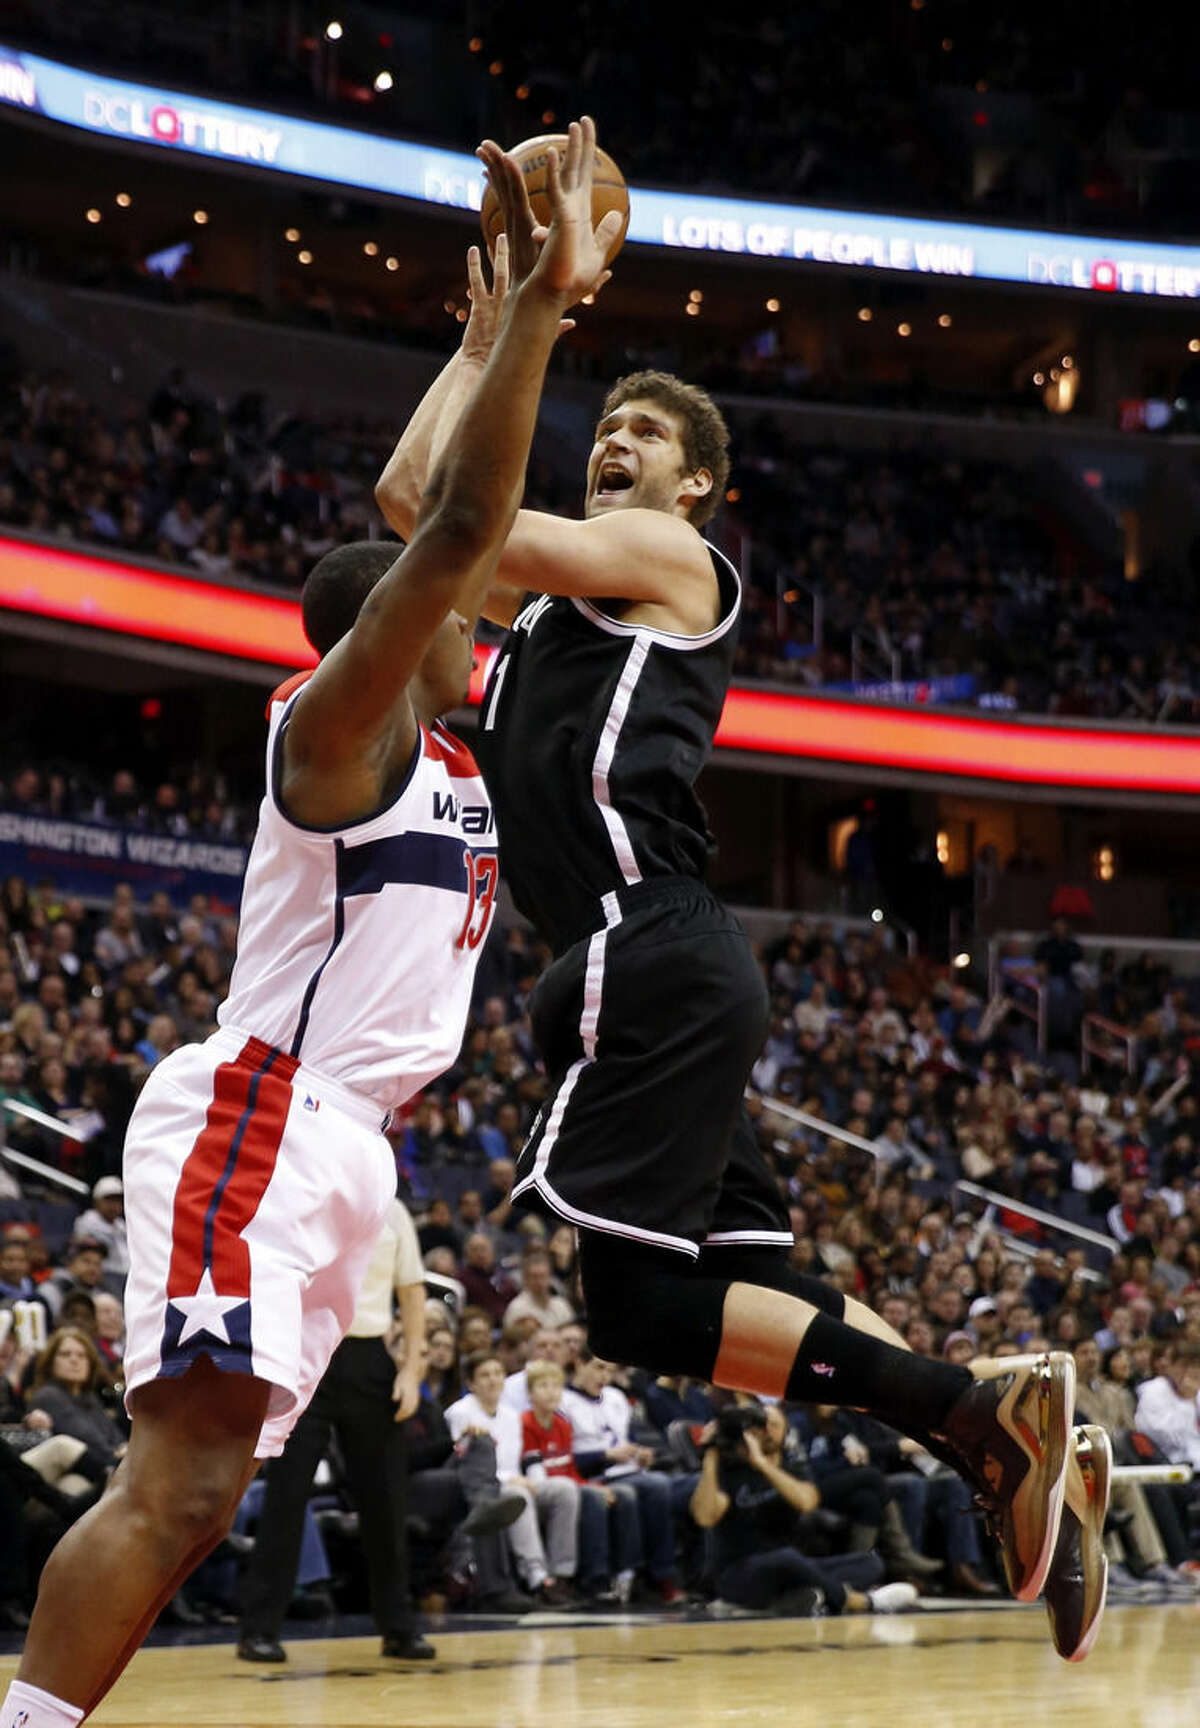 Brooklyn Nets center Brook Lopez (11) tries to shoot over Washington Wizards center Kevin Seraphin (13), from France, in the first half of an NBA basketball game Saturday, Feb. 7, 2015, in Washington. (AP Photo/Alex Brandon)